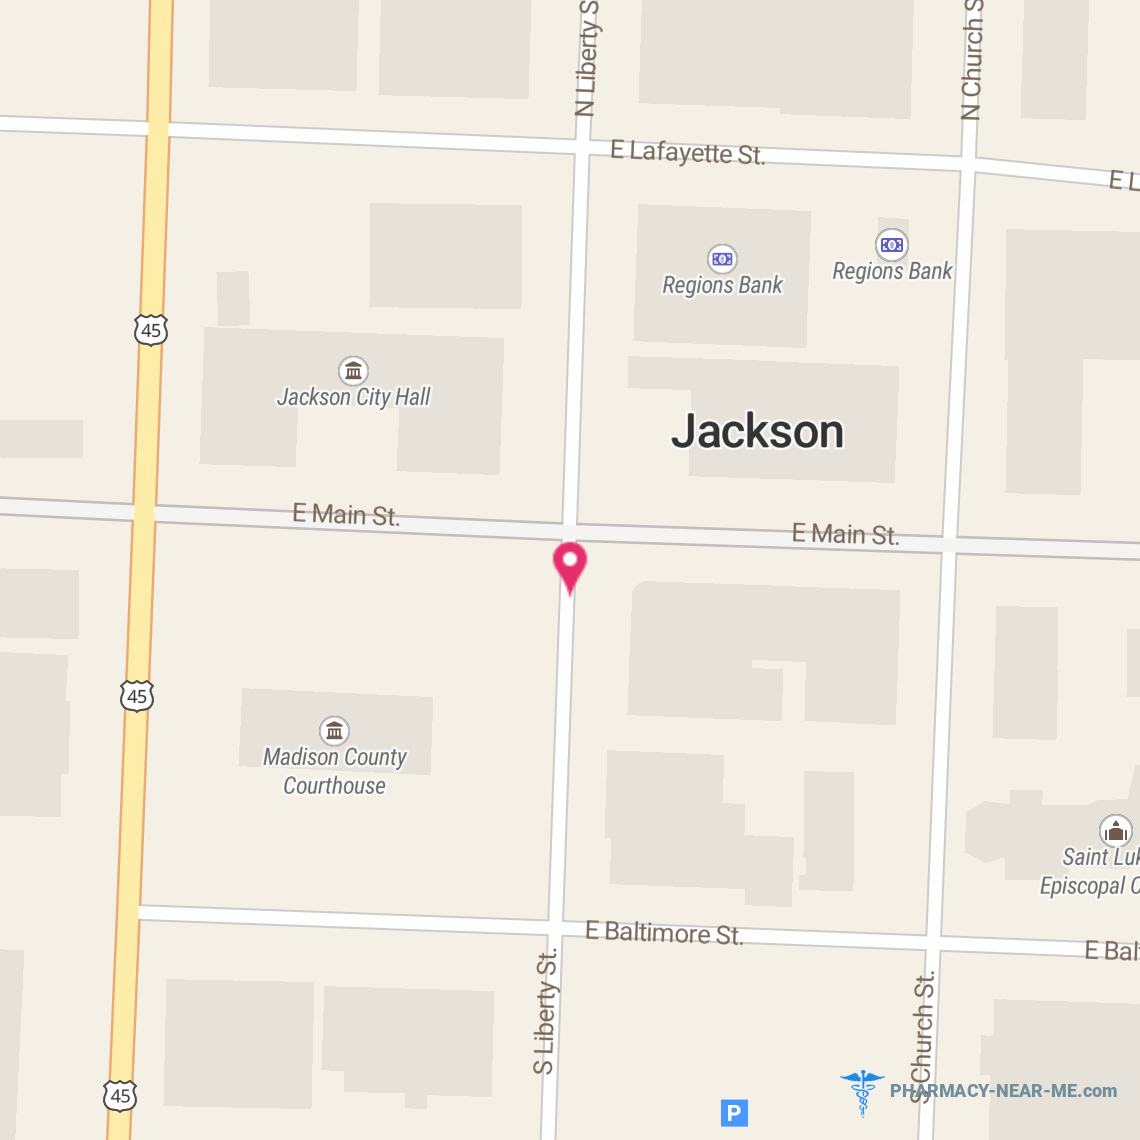 FPJ INC - Pharmacy Hours, Phone, Reviews & Information: 200 W Main St, Jackson, Tennessee 38301, United States